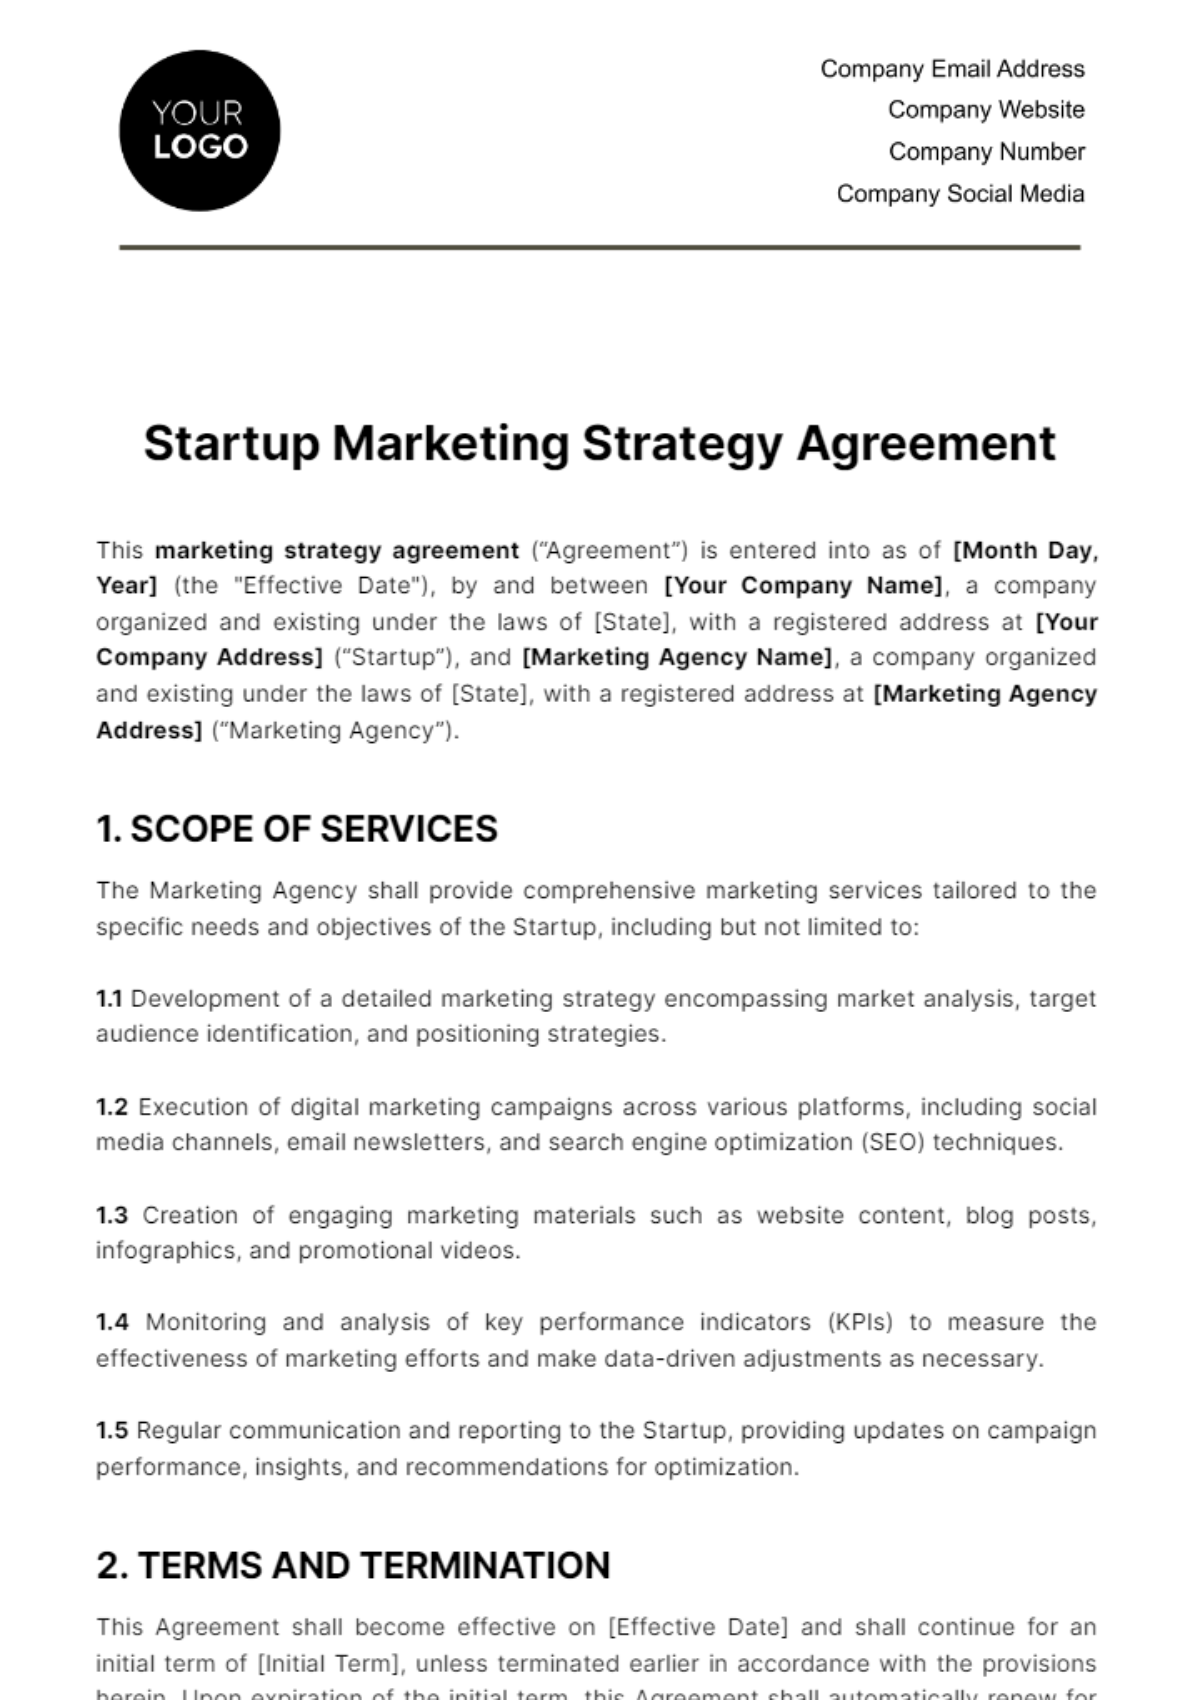 Startup Marketing Strategy Agreement Template